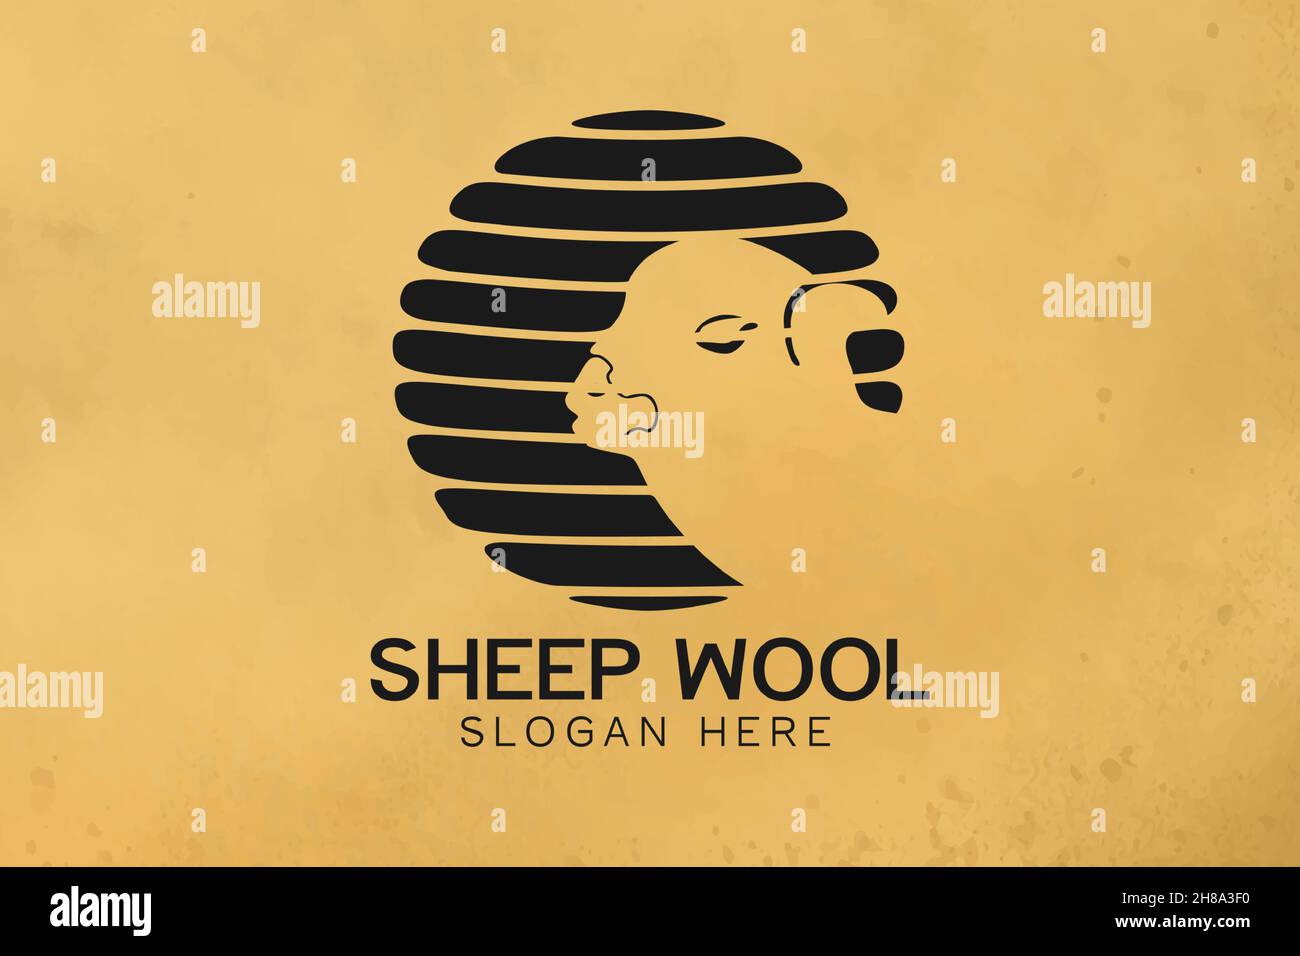 wool yarn and sheep logo Designs Inspiration Isolated on White Background Stock Vector